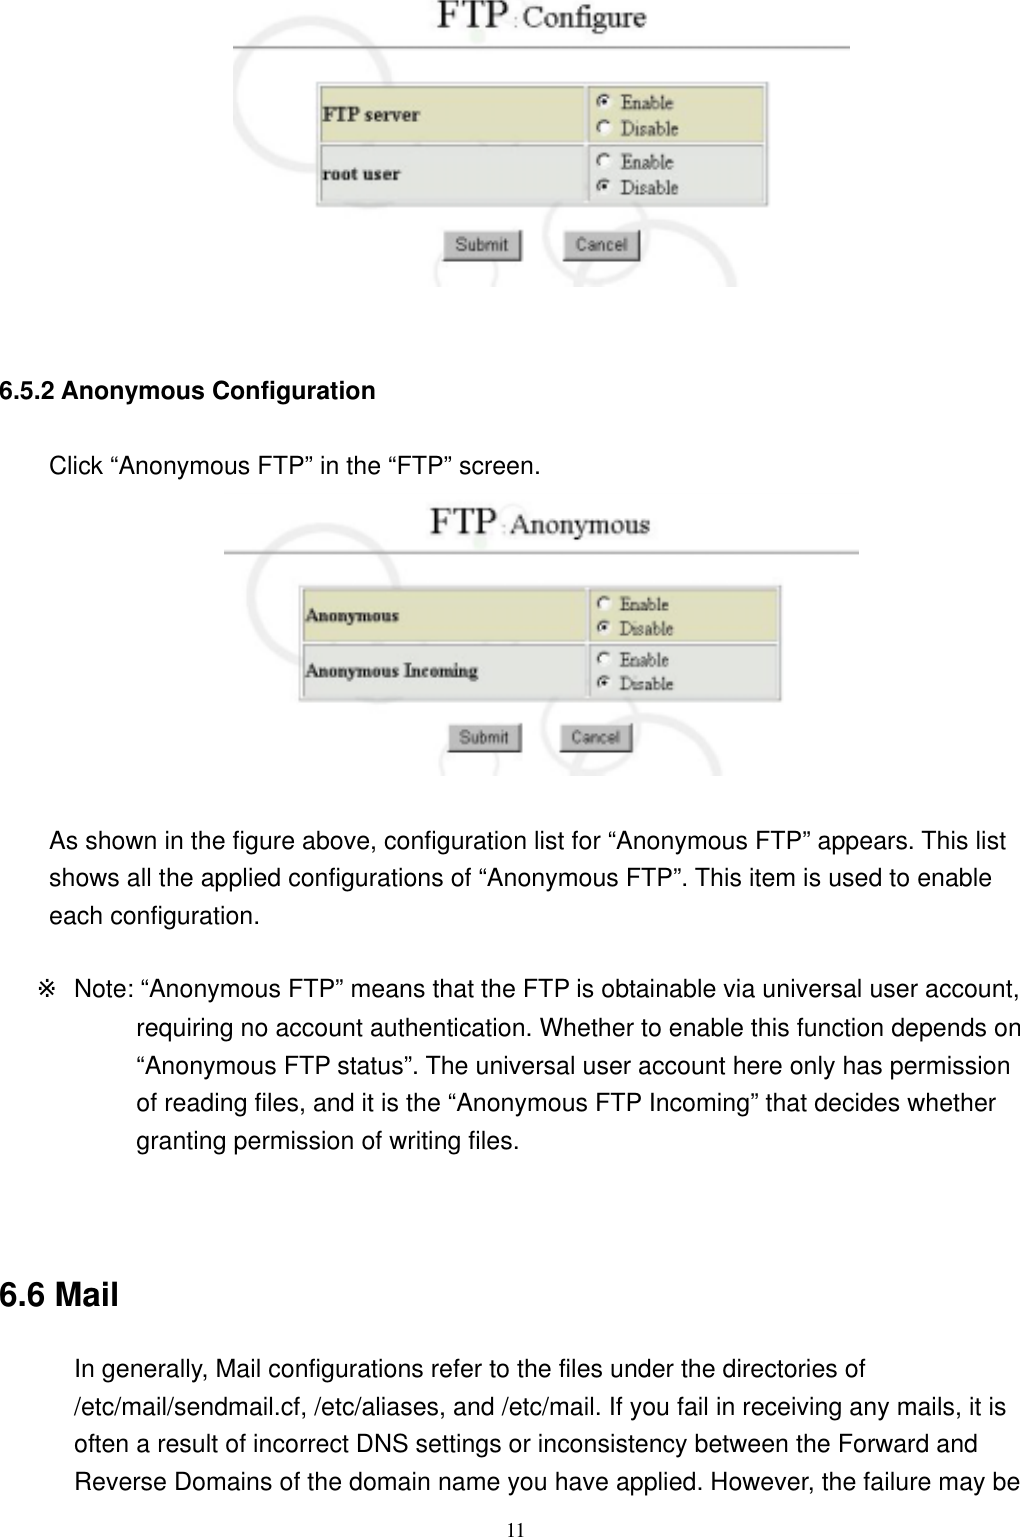  11  6.5.2 Anonymous Configuration Click “Anonymous FTP” in the “FTP” screen.   As shown in the figure above, configuration list for “Anonymous FTP” appears. This list shows all the applied configurations of “Anonymous FTP”. This item is used to enable each configuration.  ※  Note: “Anonymous FTP” means that the FTP is obtainable via universal user account, requiring no account authentication. Whether to enable this function depends on “Anonymous FTP status”. The universal user account here only has permission of reading files, and it is the “Anonymous FTP Incoming” that decides whether granting permission of writing files.   6.6 Mail In generally, Mail configurations refer to the files under the directories of /etc/mail/sendmail.cf, /etc/aliases, and /etc/mail. If you fail in receiving any mails, it is often a result of incorrect DNS settings or inconsistency between the Forward and Reverse Domains of the domain name you have applied. However, the failure may be 